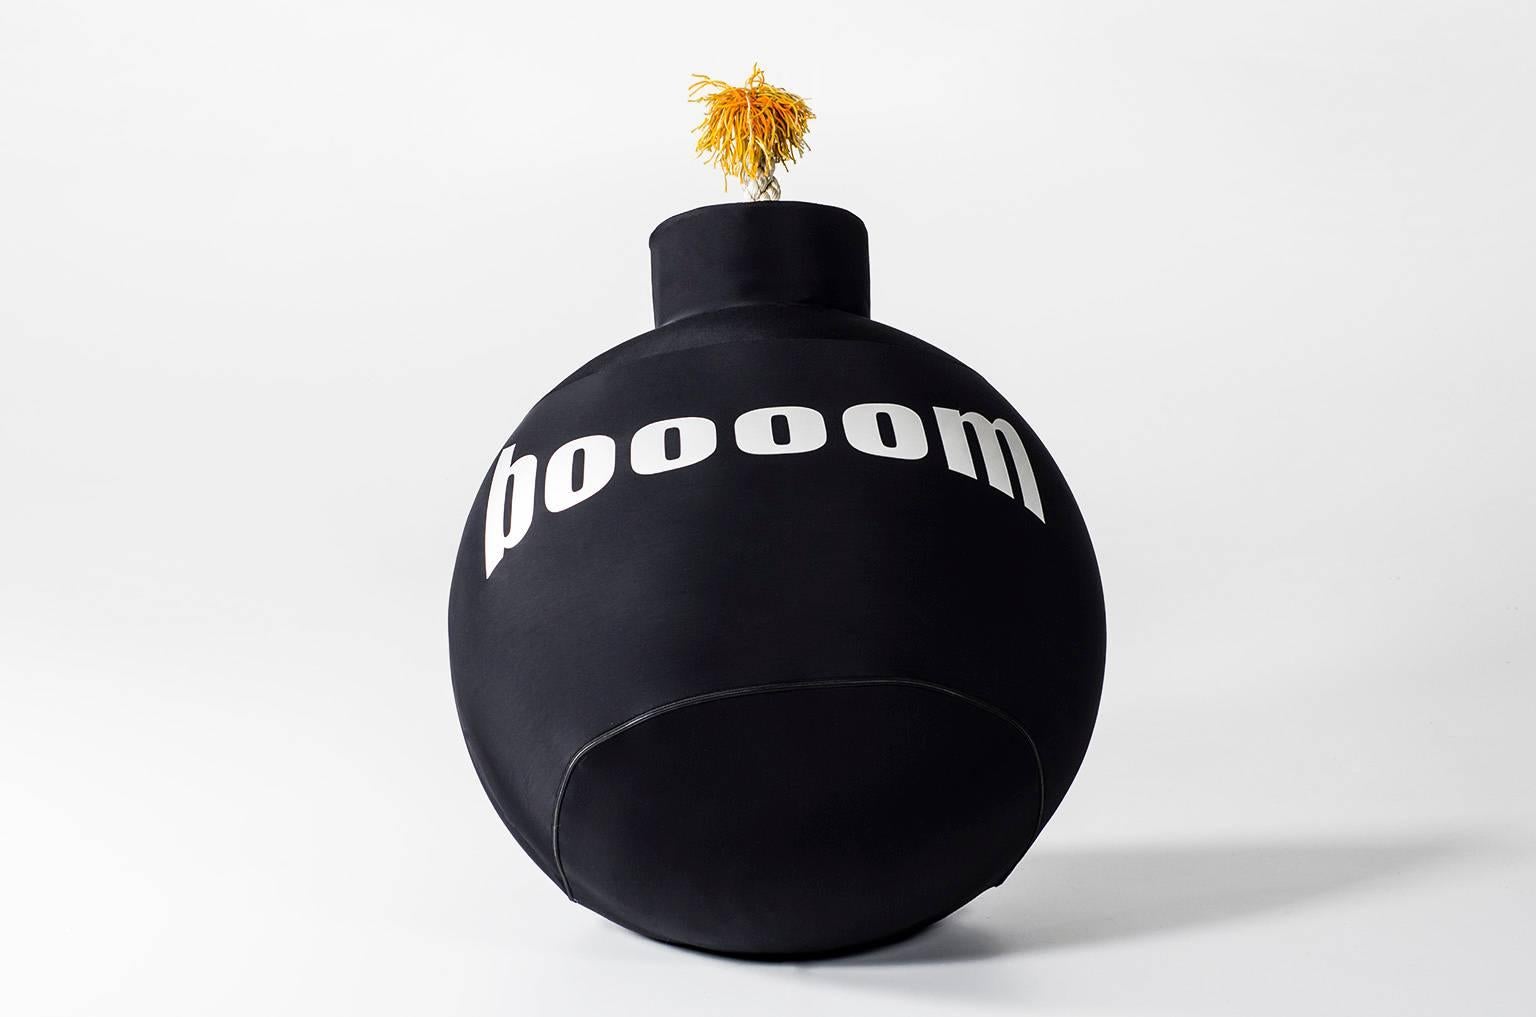 Is a bomb!
Be seated on a bomb!
Is a sexy bomb!
Is comfortable, resistant and elastic, these element of the collective imaginary, turns in to an informal seat, fun for the new Munchausen.
LA BUM can be a merchandising product, customizable with